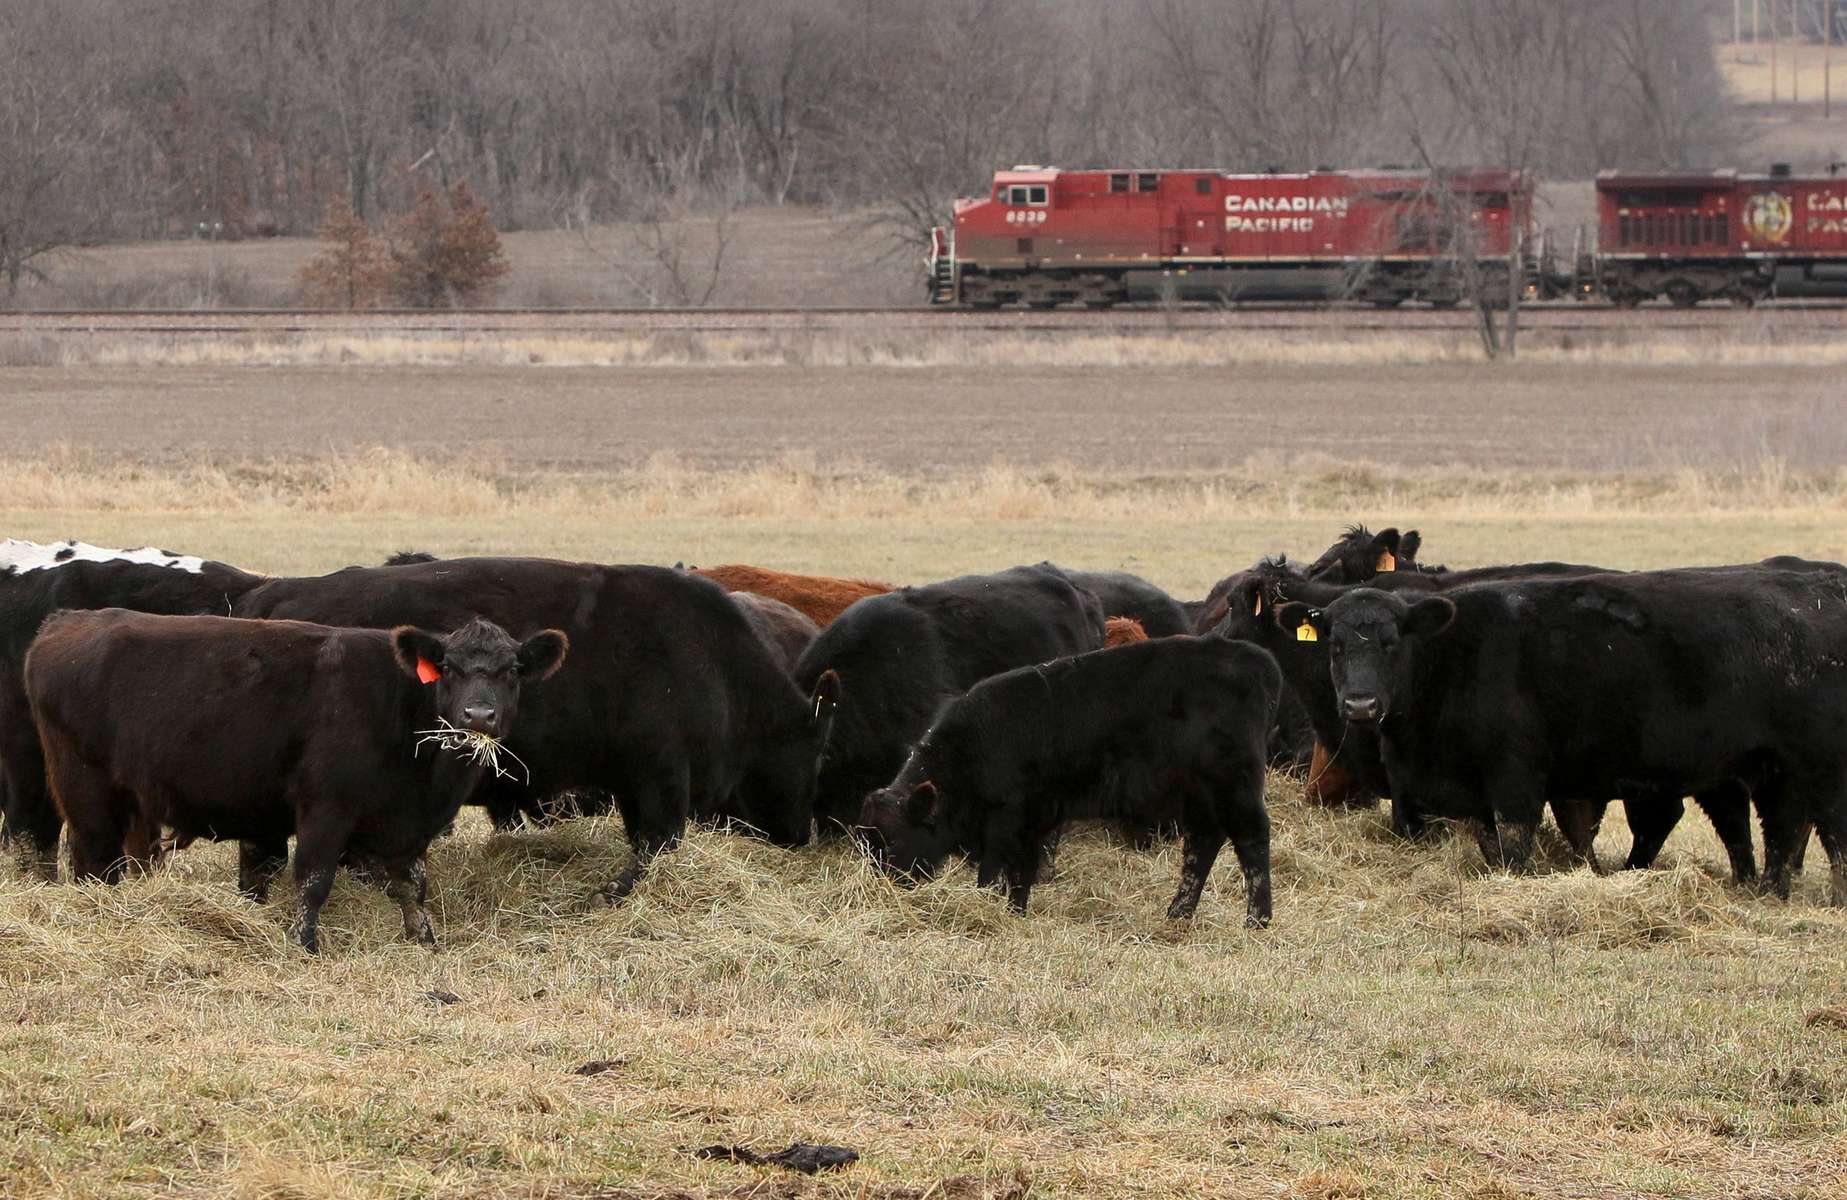 A Canadian Pacific train rolls by a barbed wire fence as it passes farmer Jerry Gibson's cows and calves eating their morning hay at his farm outside of Newtown, Mo., on Thursday, Dec. 6, 2012.  Missouri is one of 26 states that have laws saying railroads are liable for livestock struck by trains along unfenced tracks.  Gibson's lawyer sent a letter to Canadian Pacific demanding the railroad put up a fence after four of his cows were killed by trains in 2011. Months later the railroad installed about mile of fencing to protect the cows.Photo By David Carson, dcarson@post-dispatch.com